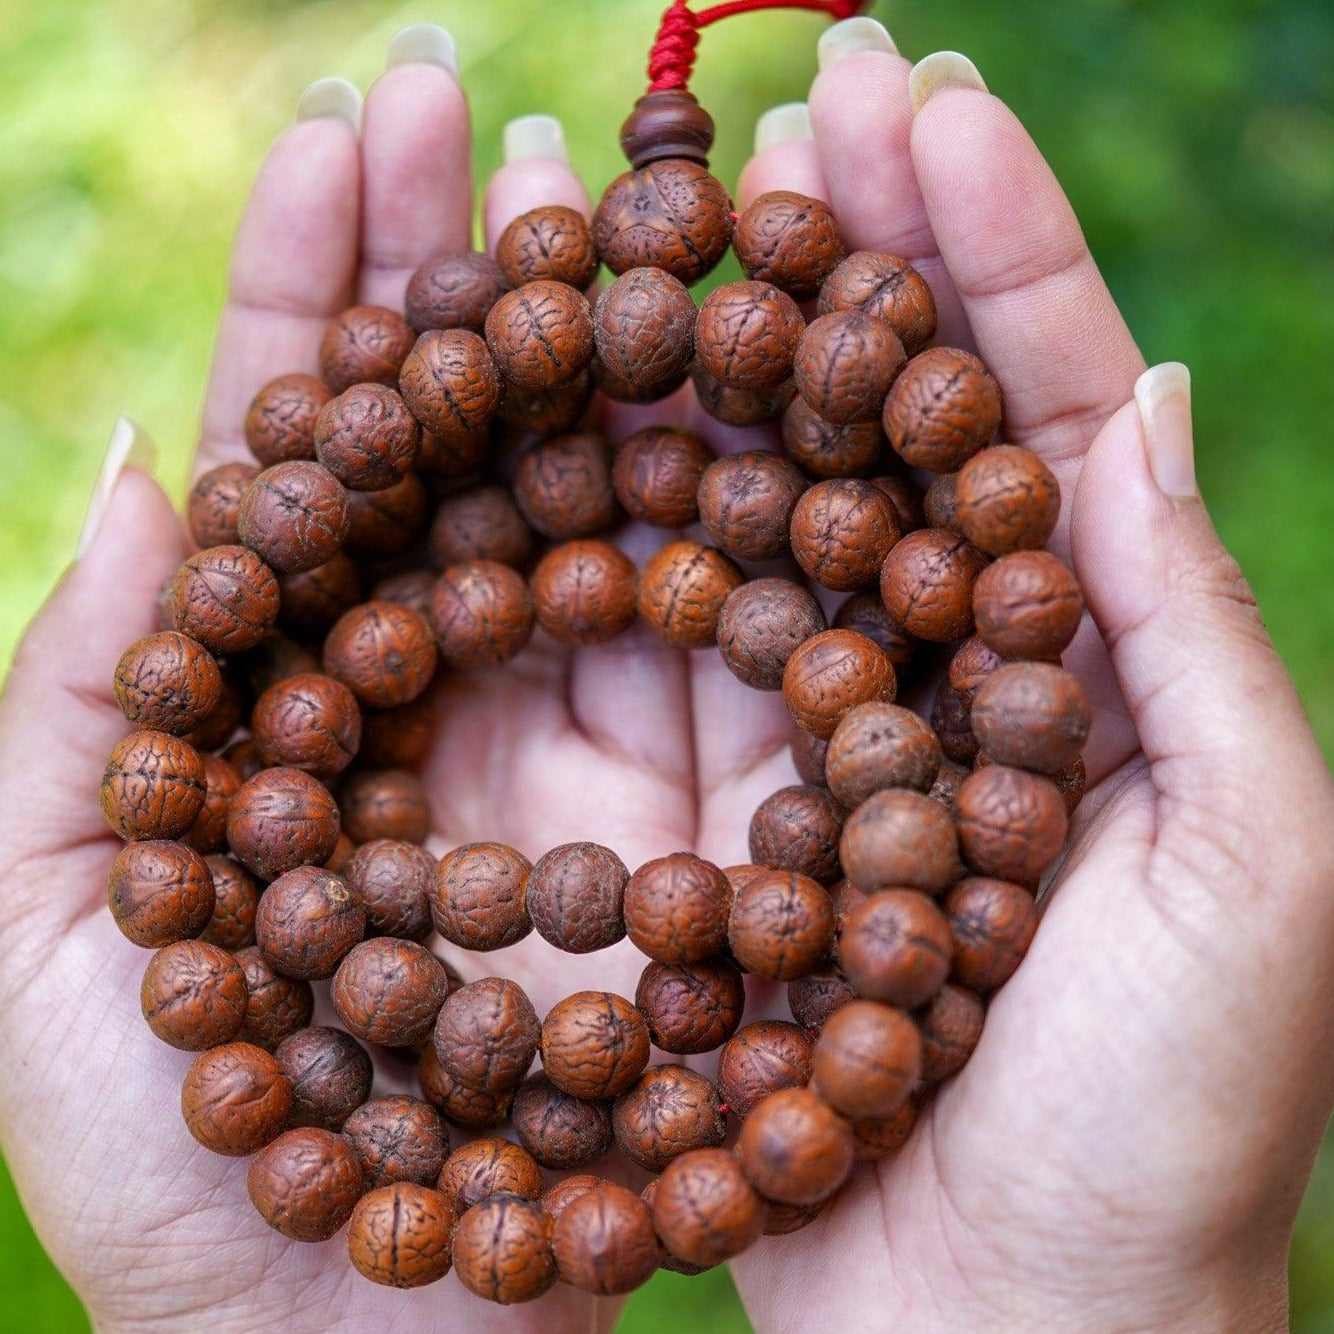 Bodhi Seed Mala Meaning: Benefits and Uses